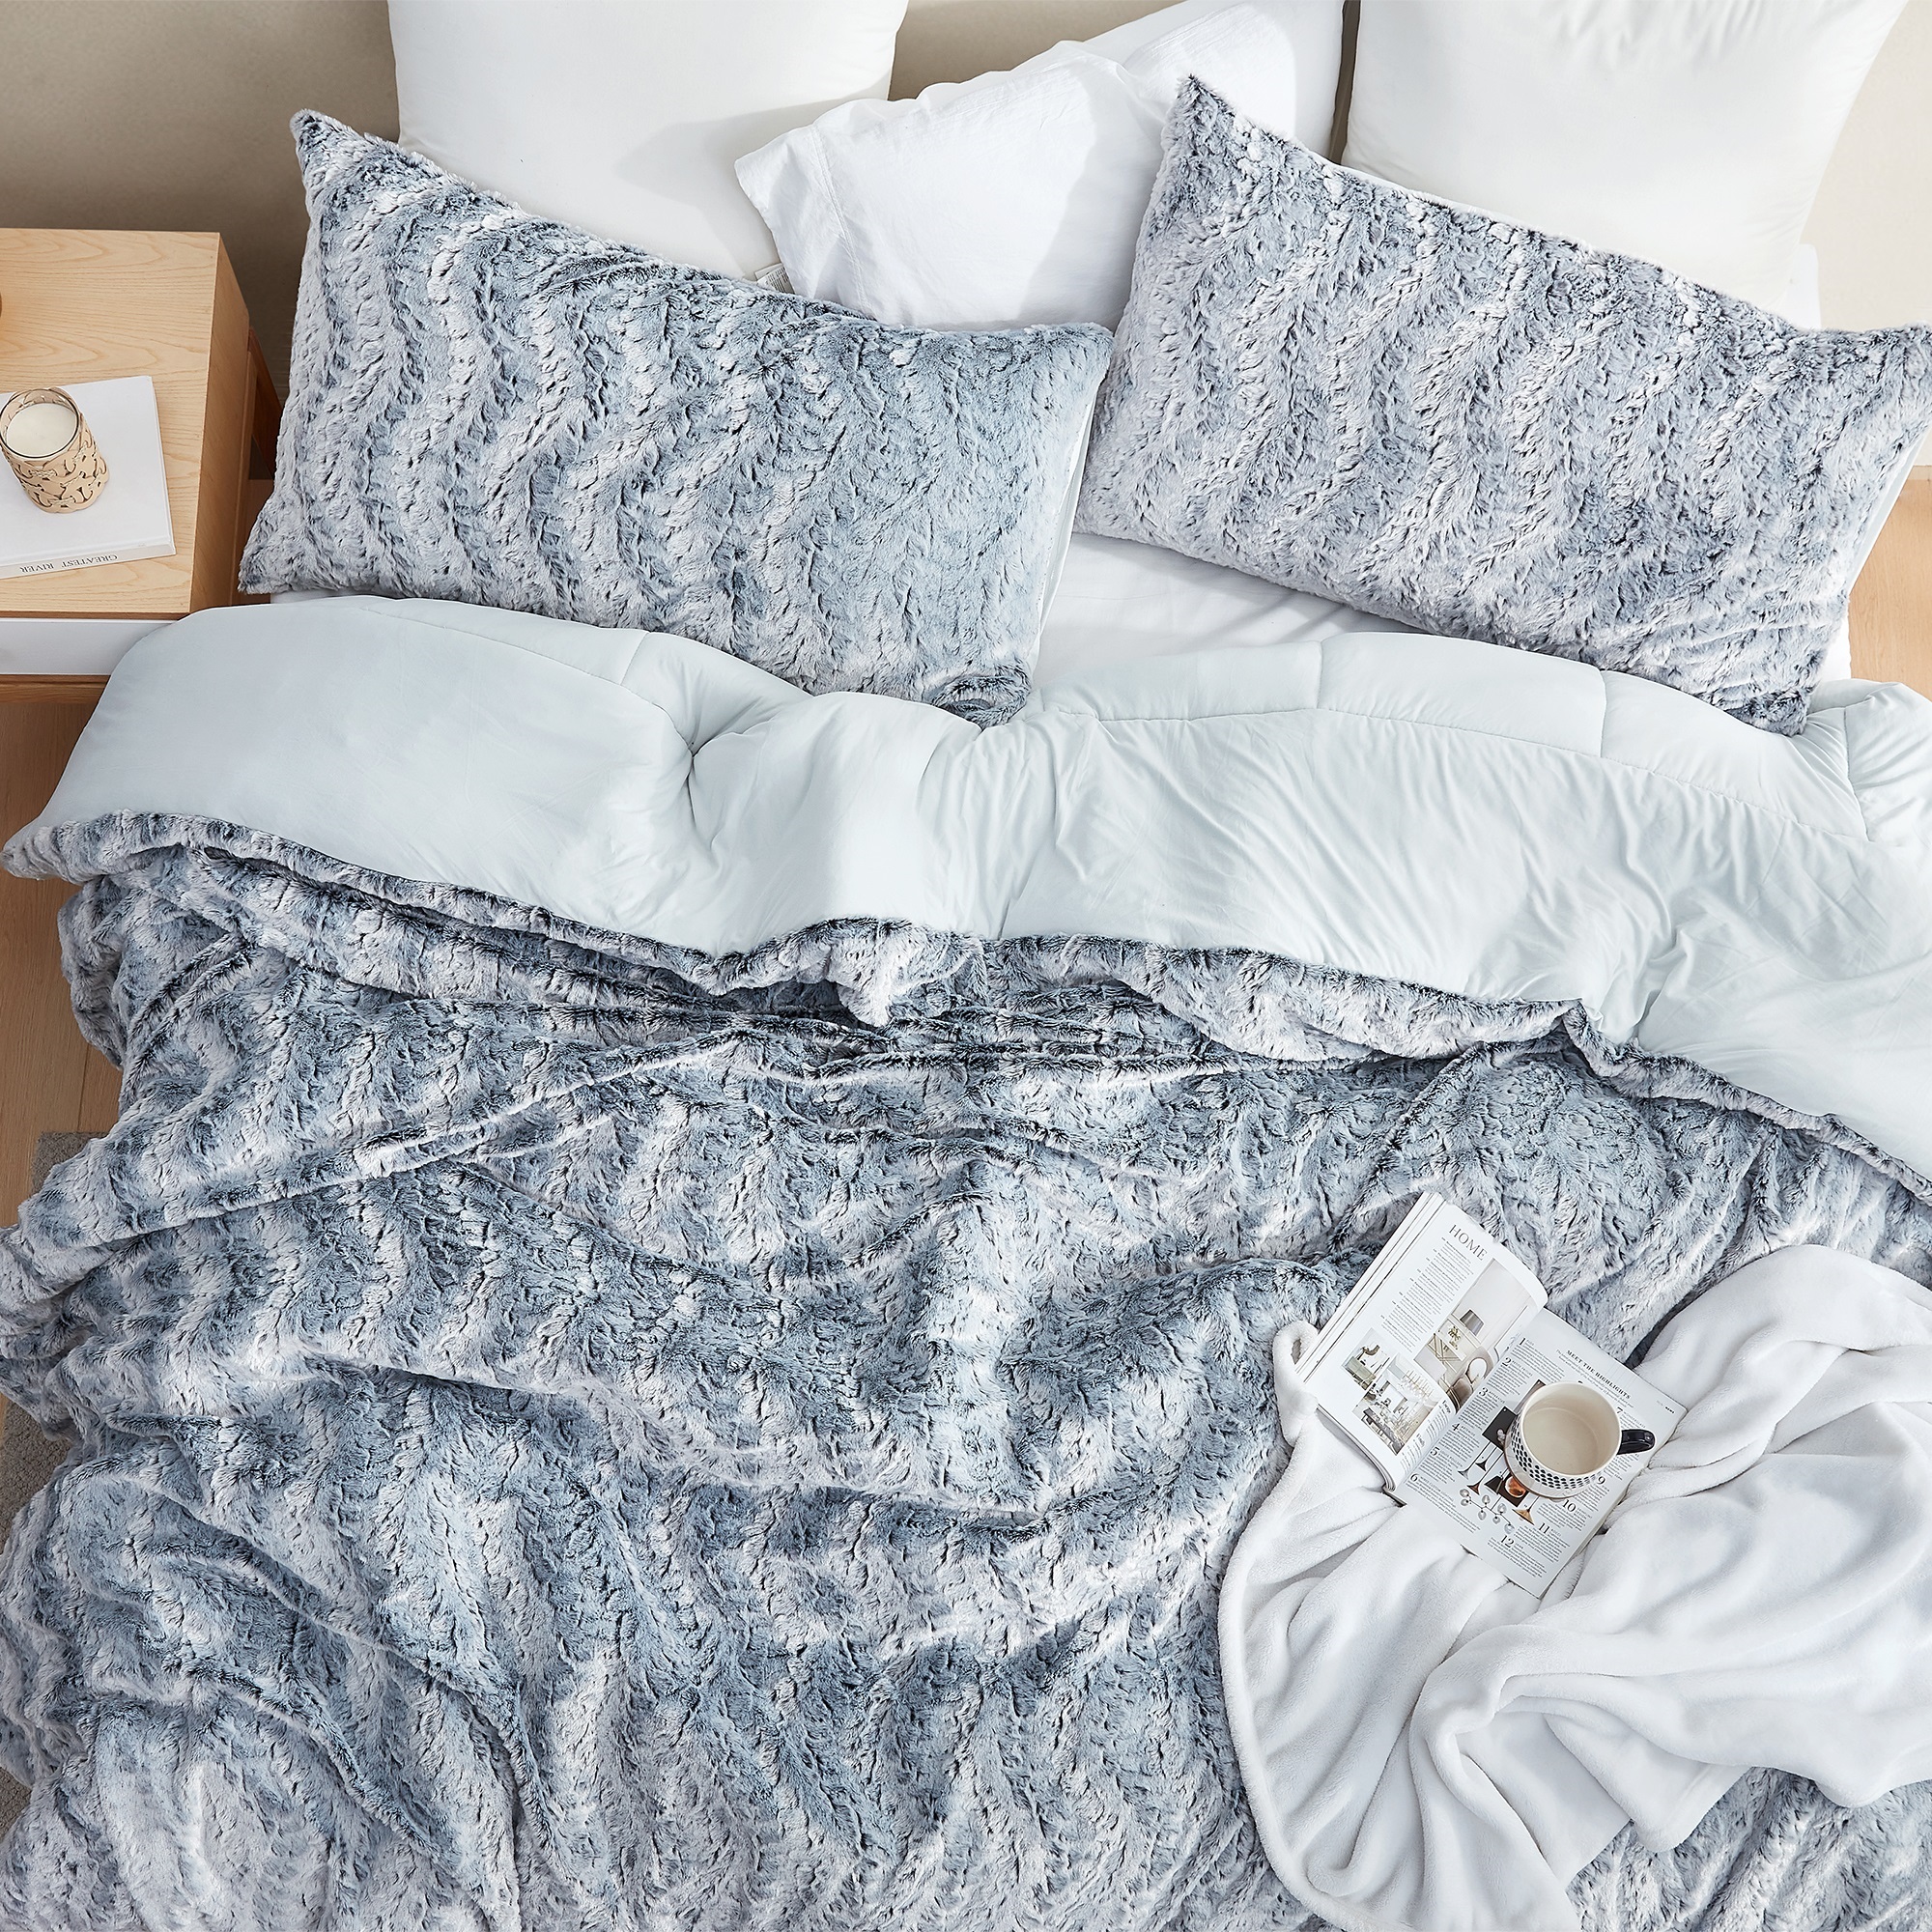 Wolf Tracks - Coma Inducer (with Butter) Oversized Comforter - Coyote Gray